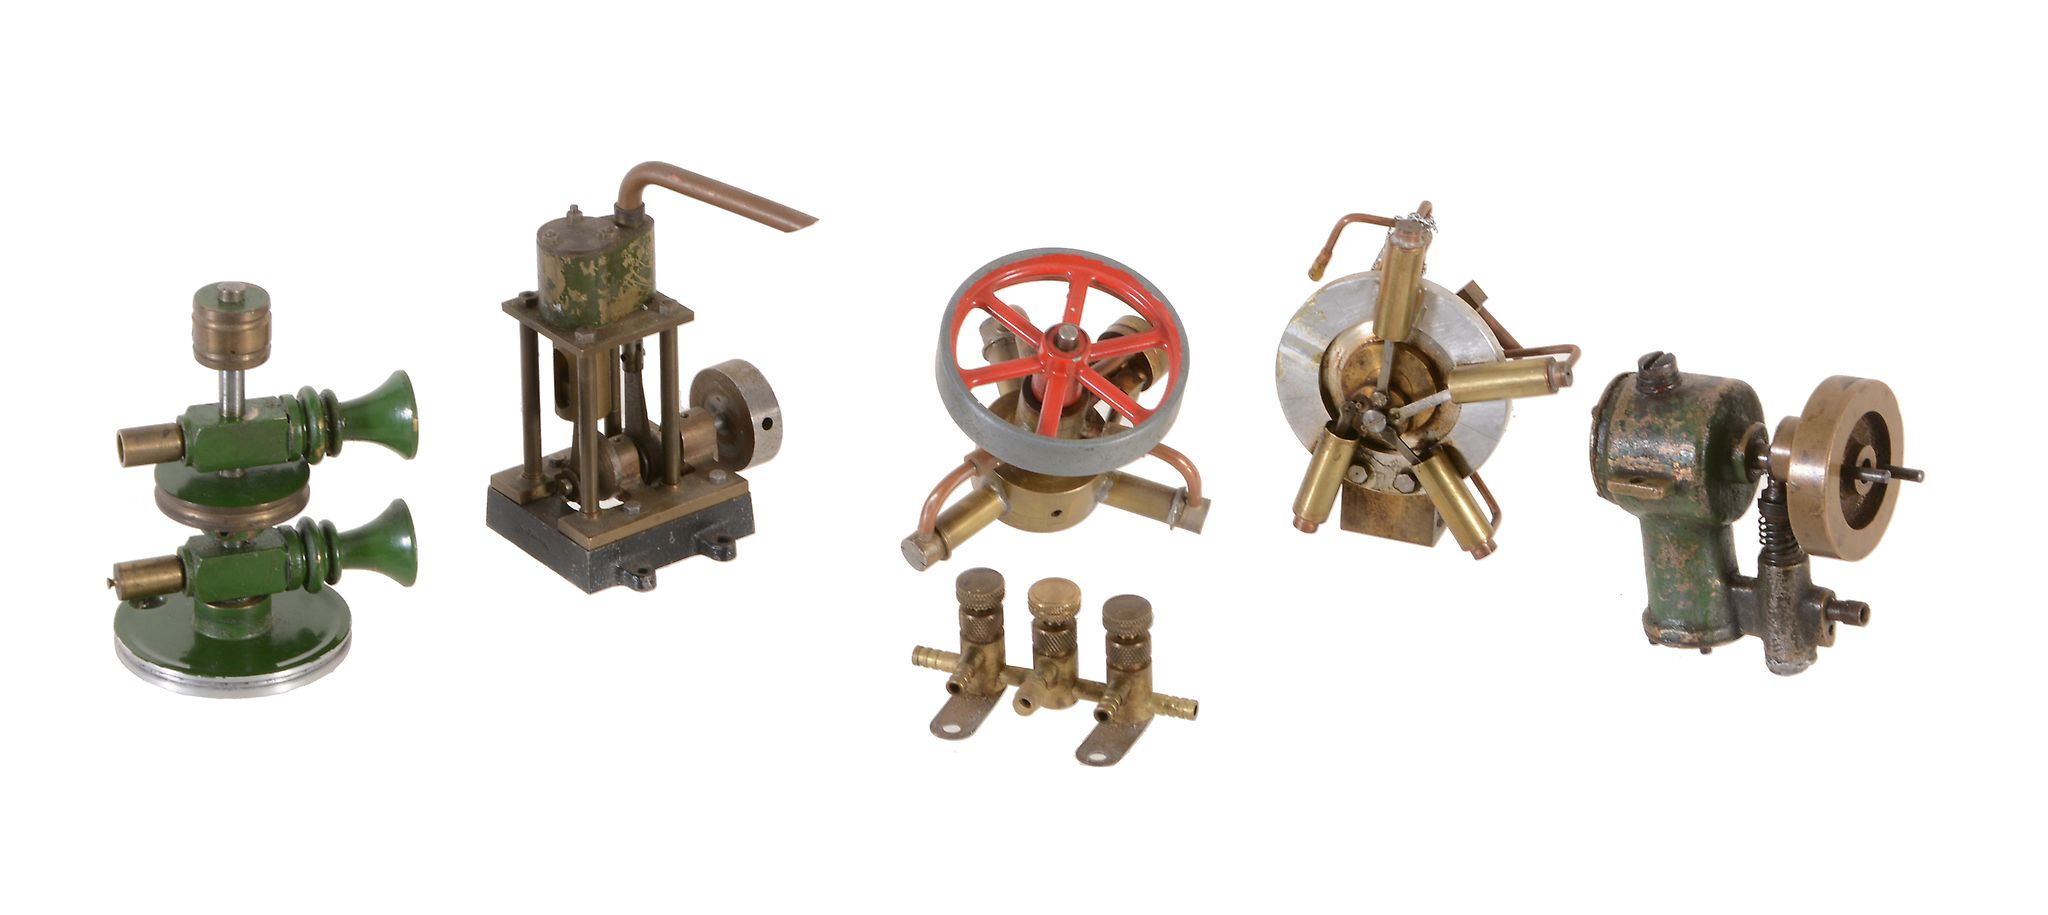 A collection of small steam related items and live steam engines, to include a vertical engine